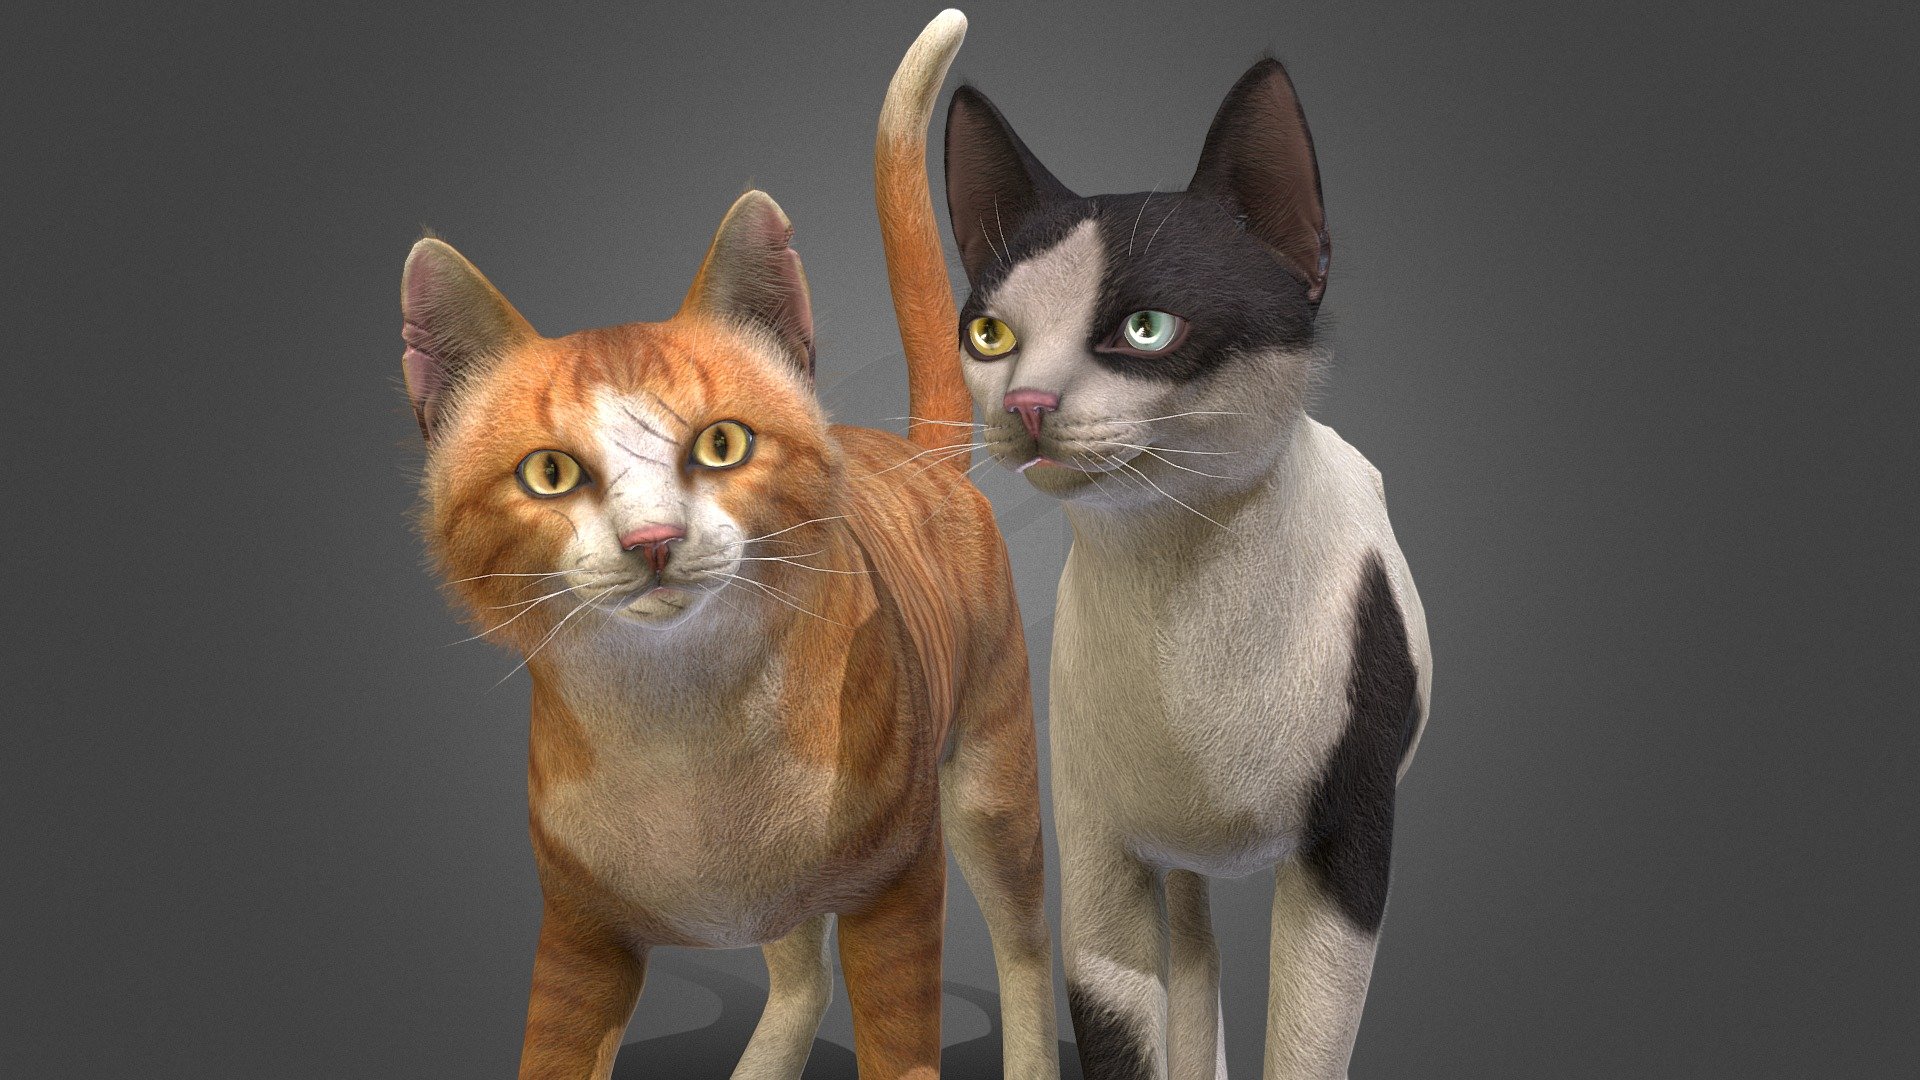 Stray cat models with 100+ IP/PM animations, 2 geometry options and 10 color options.

All colors and animations can be viewed at the links below:
https://sketchfab.com/3d-models/skinny-cats-dfb910f3d6d54251bd1fc775c5a0829d
https://sketchfab.com/3d-models/stray-cats-800d6a6739464266bb5ce0000ad81423
https://sketchfab.com/3d-models/cat-stray-fe3b23bbd56945c5ac170fe861f7fad1

In the attached archive you will find all files with animations. 

If you have any questions, please email me 3d model